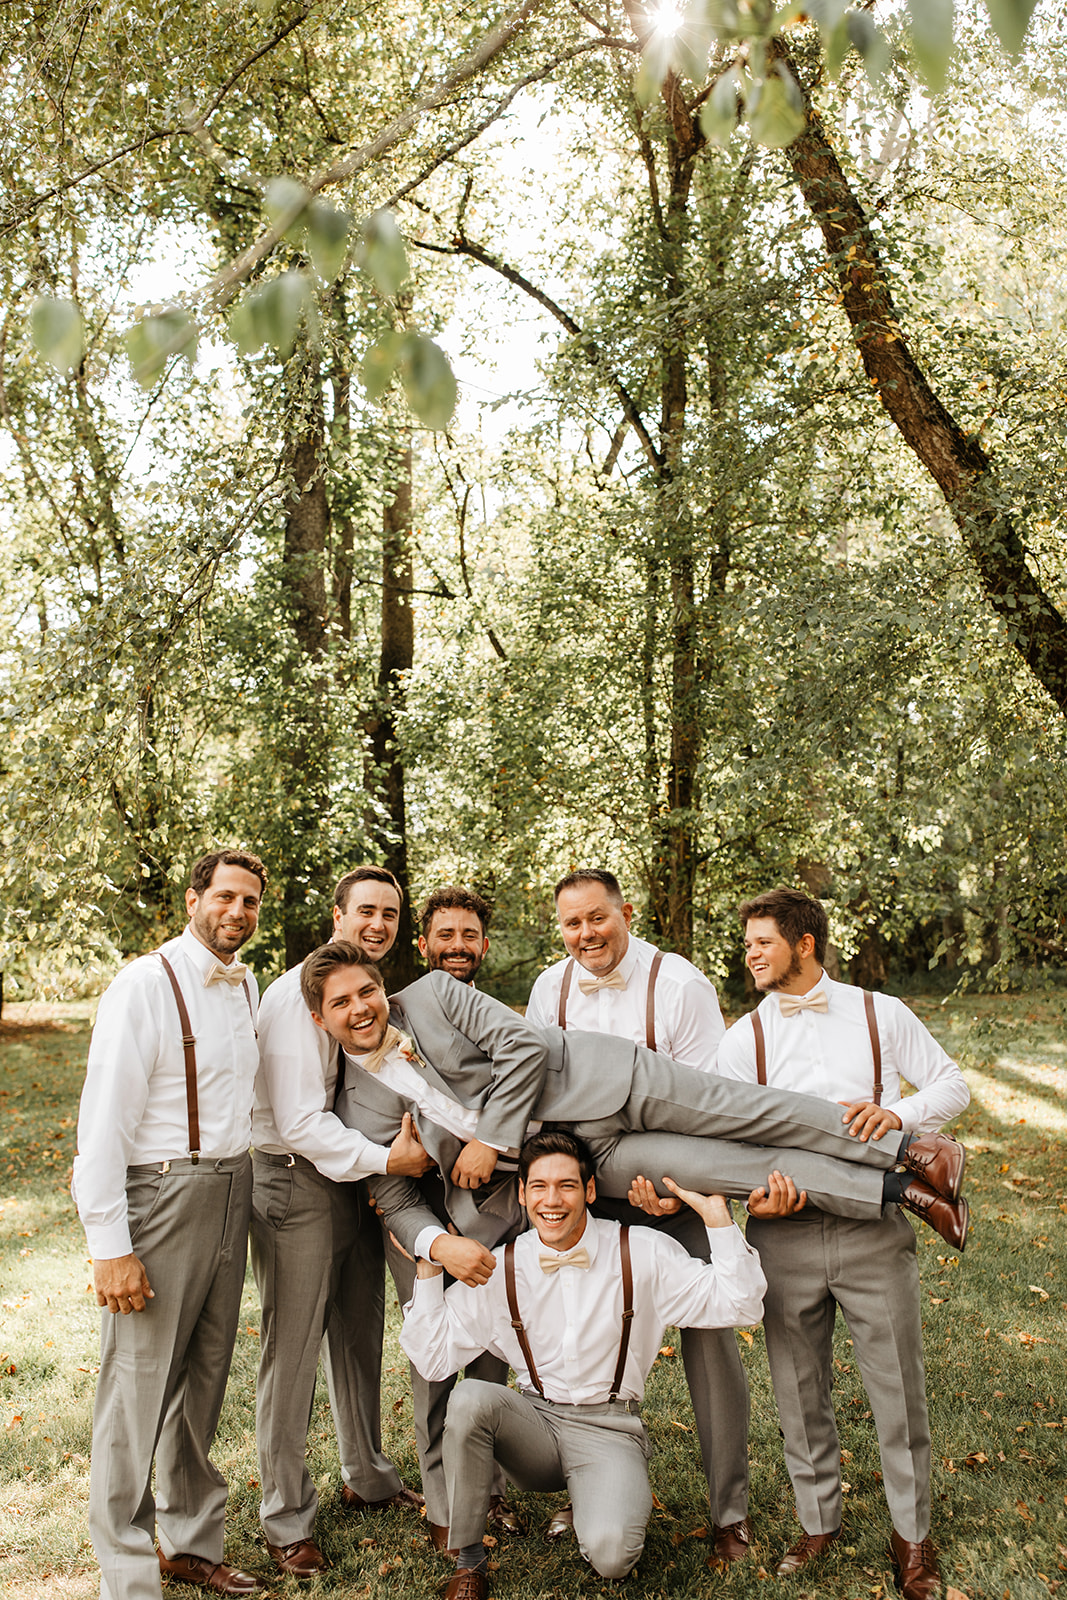 the groomsmen lifting up the groom